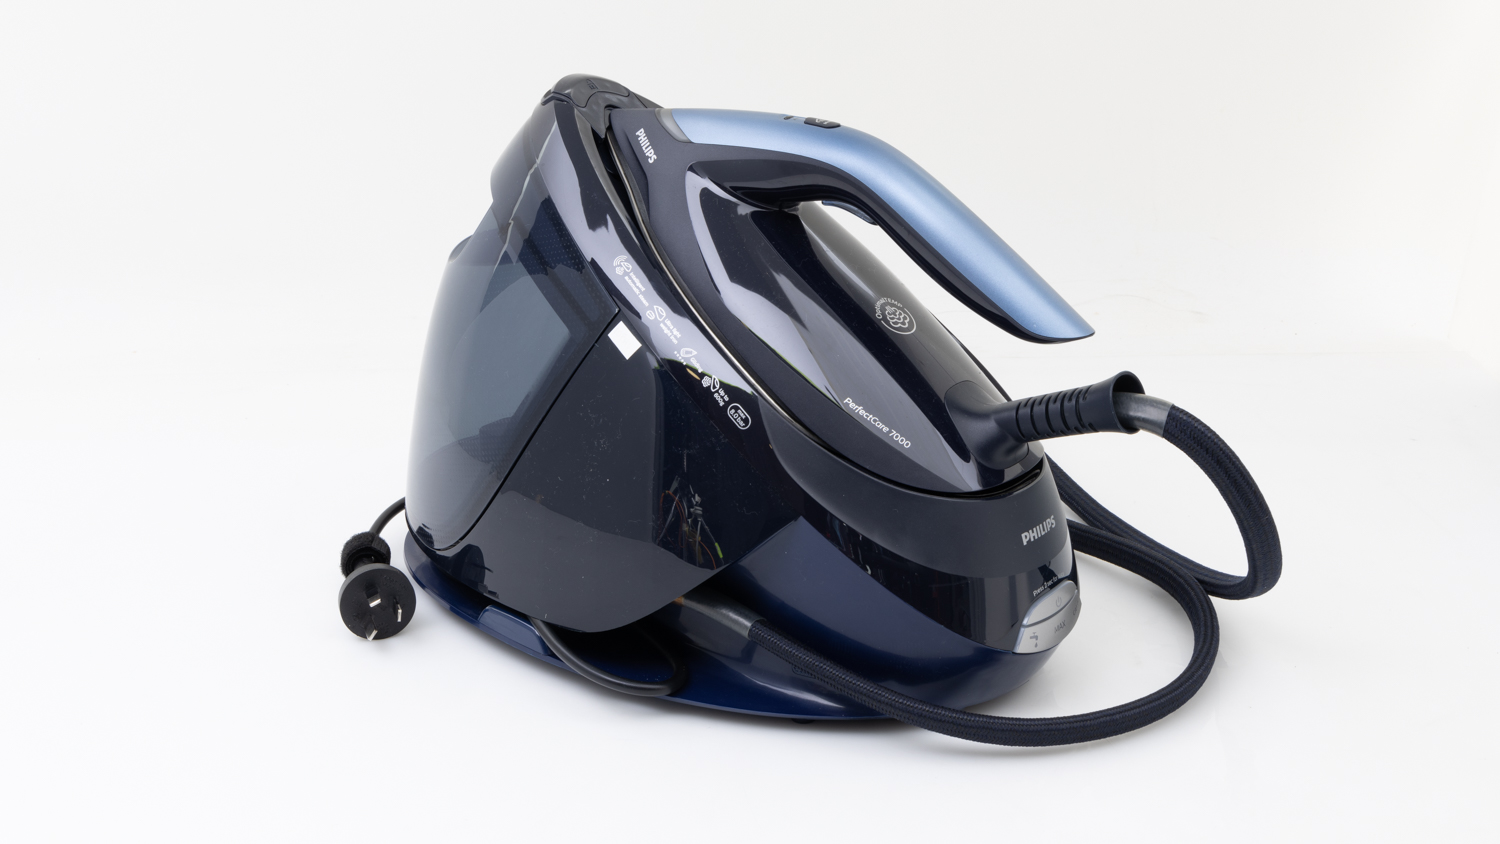 Philips PerfectCare 7000 Series Steam Generator PSG7130/20 Review